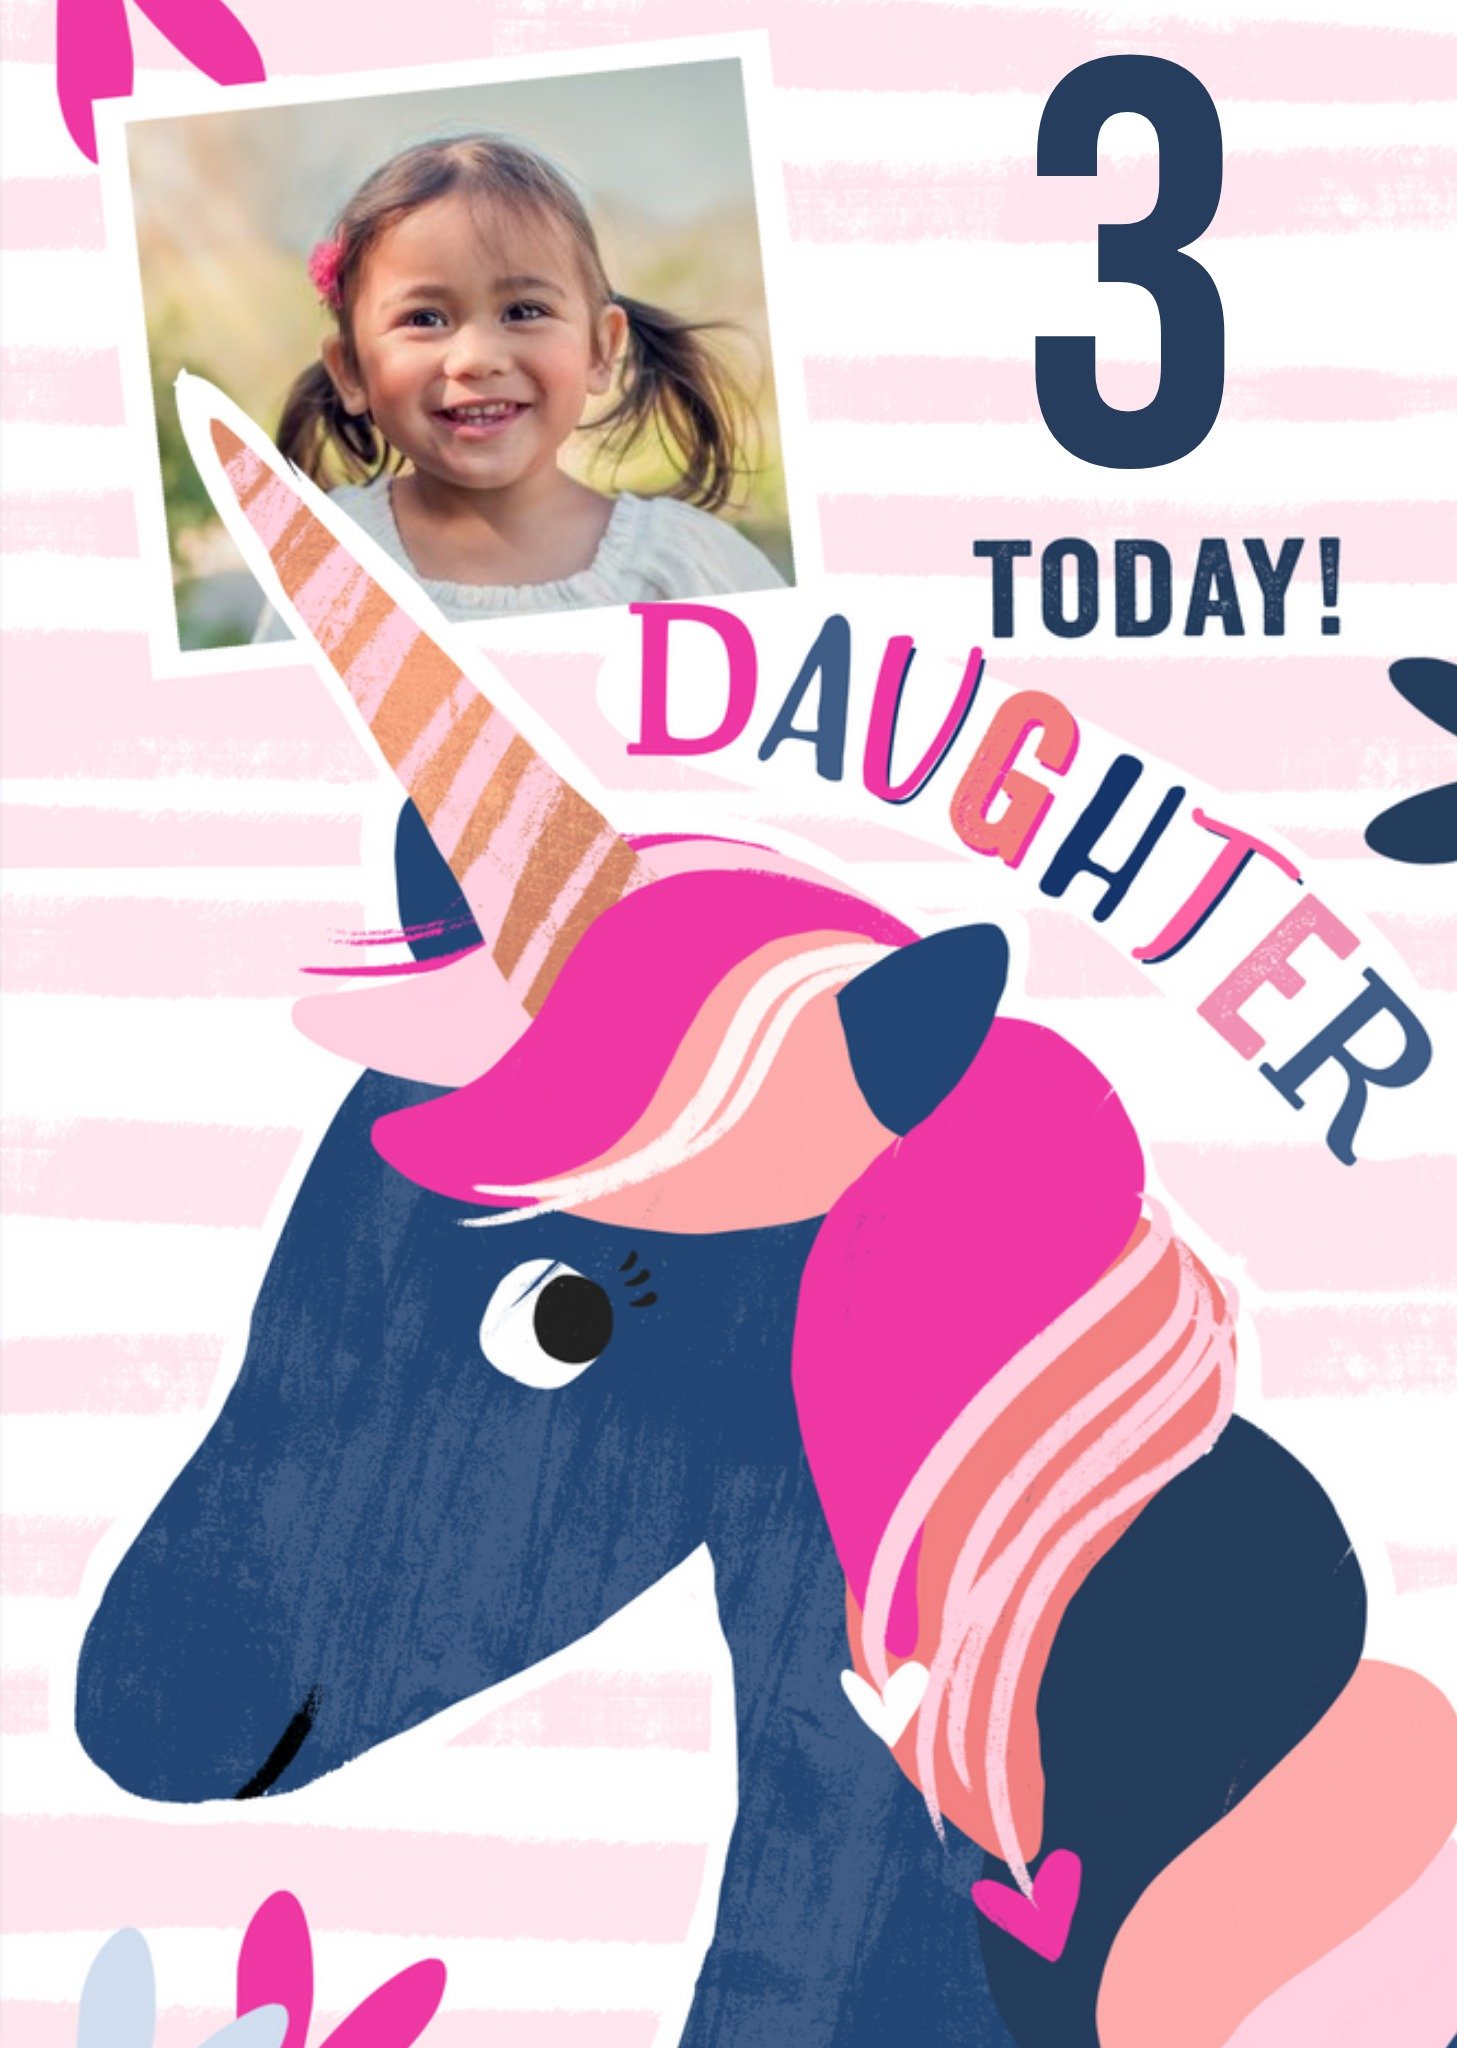 Moonpig 3 Today Unicorn Photo Upload Birthday Card For Daughter, Large